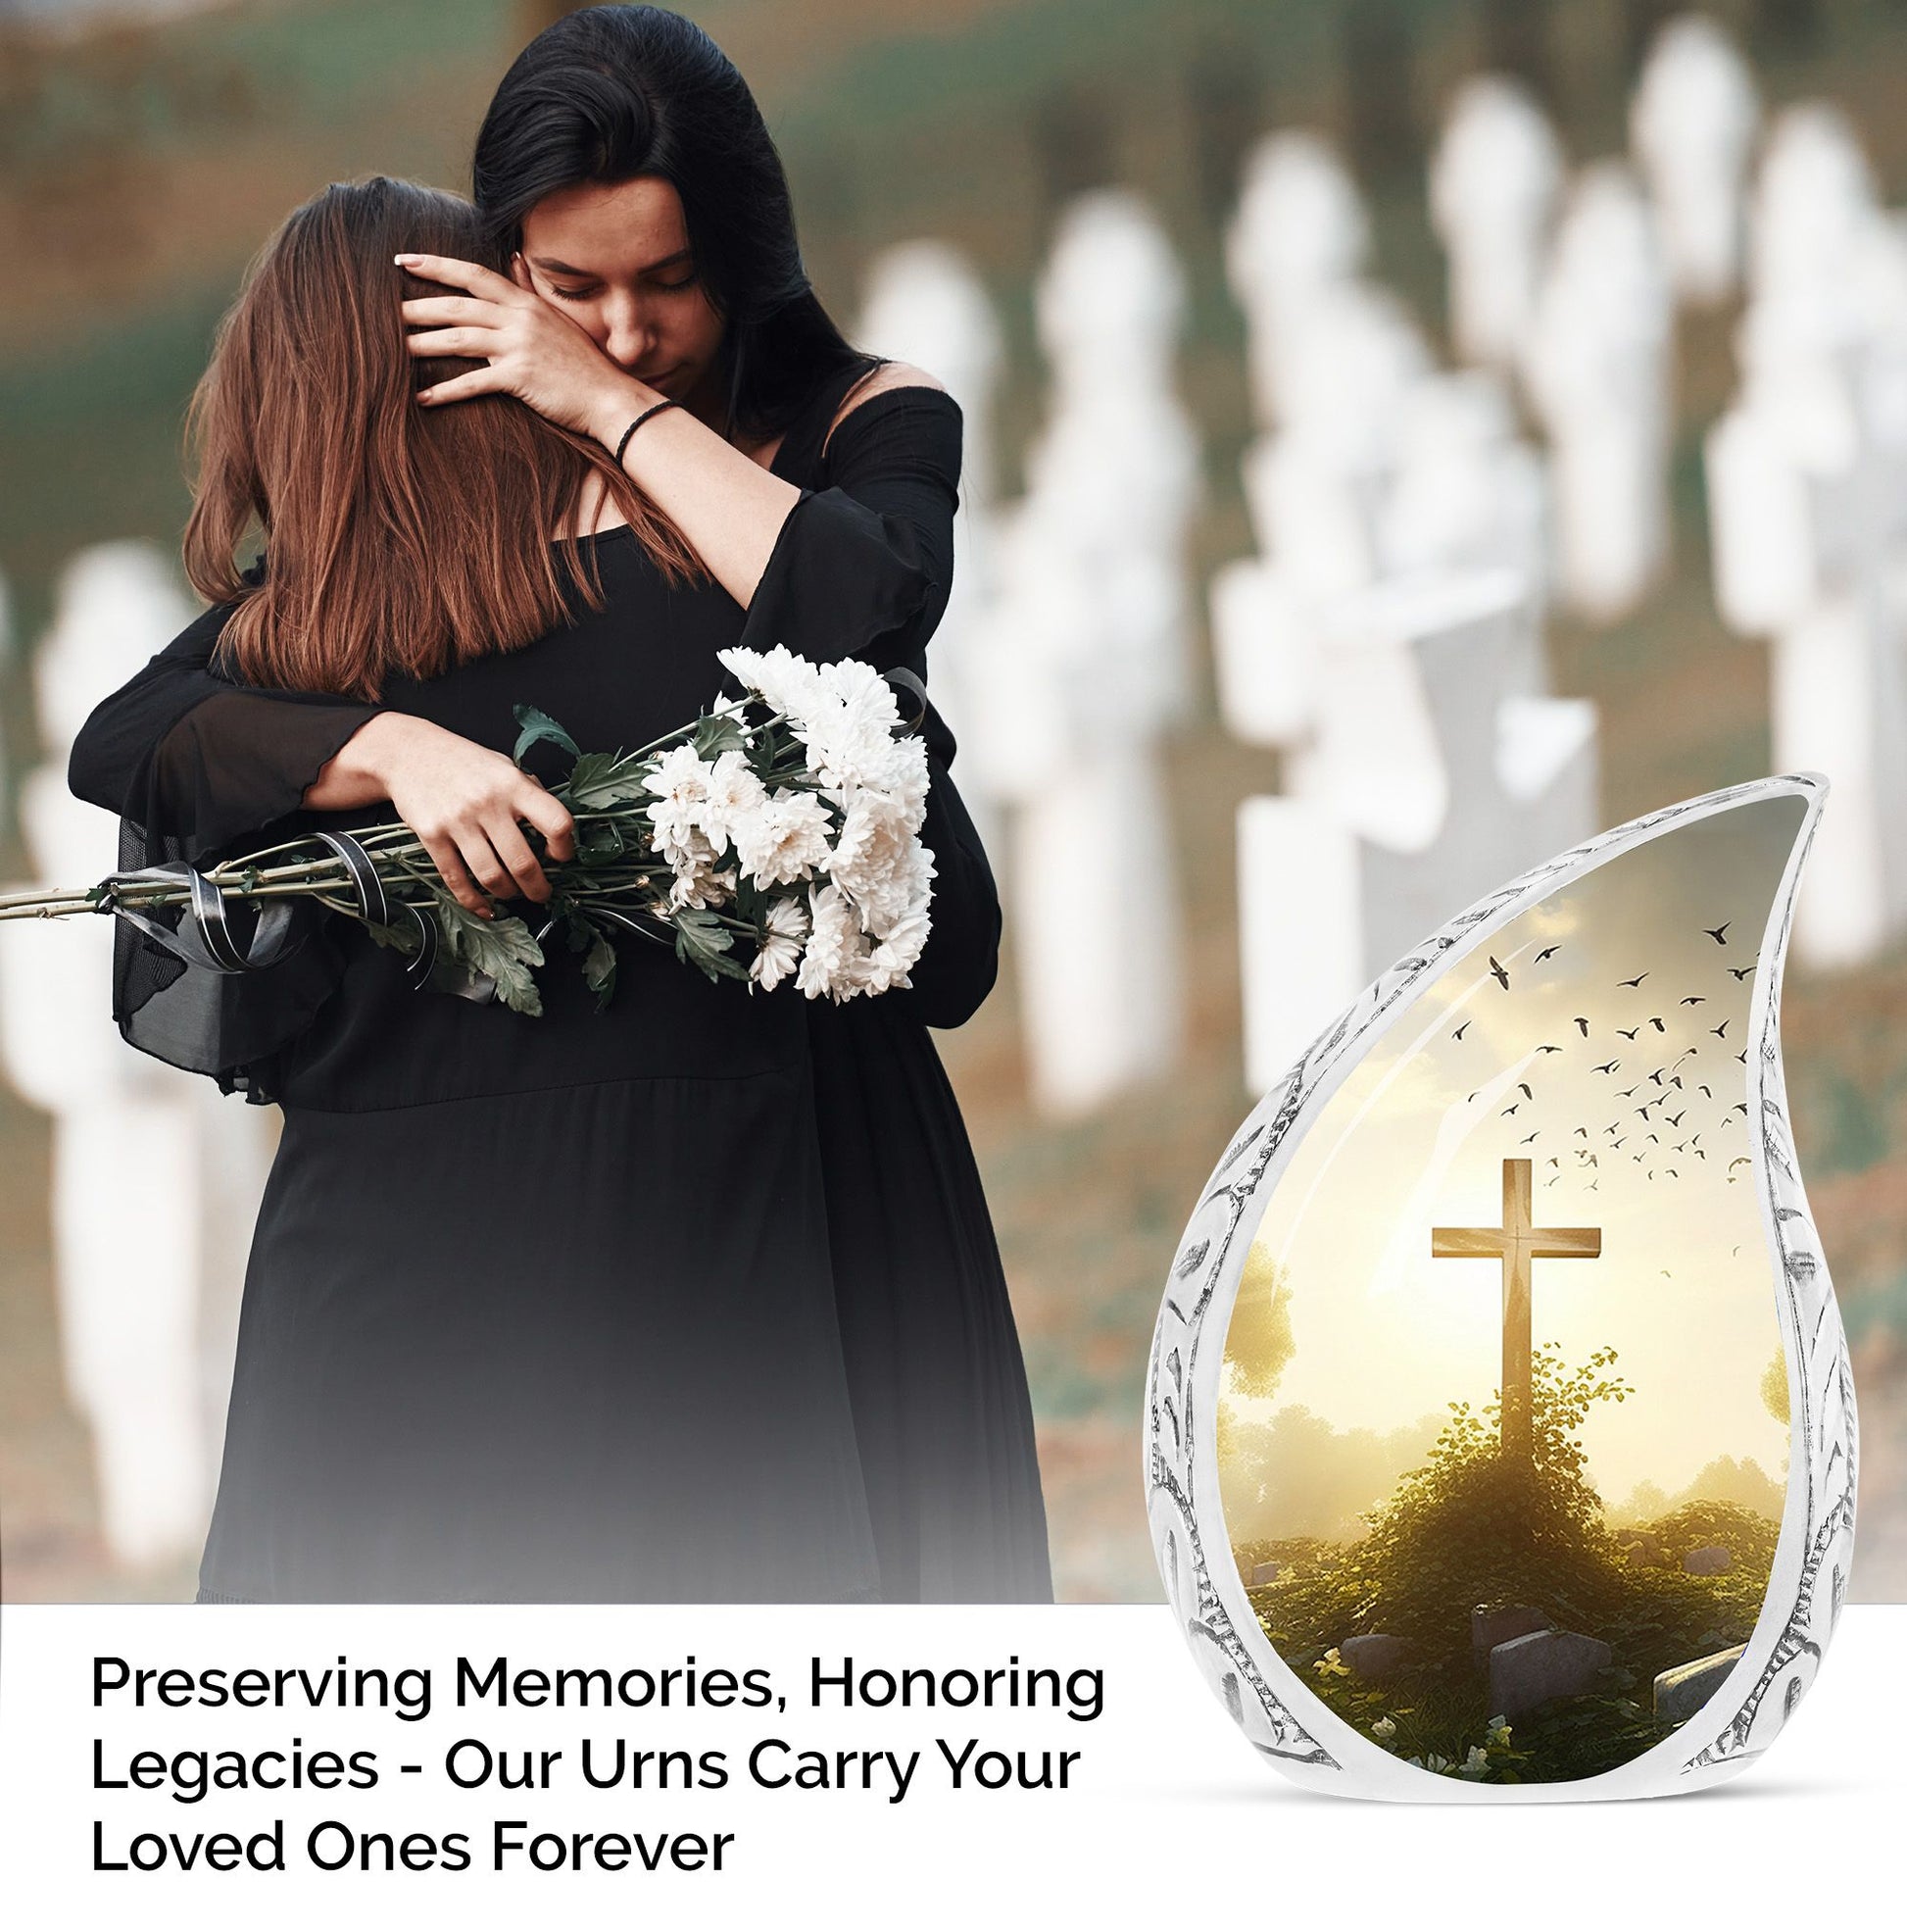 Large Christ themed funeral urn with sunset in forest background, ideal for adult human ashes burial